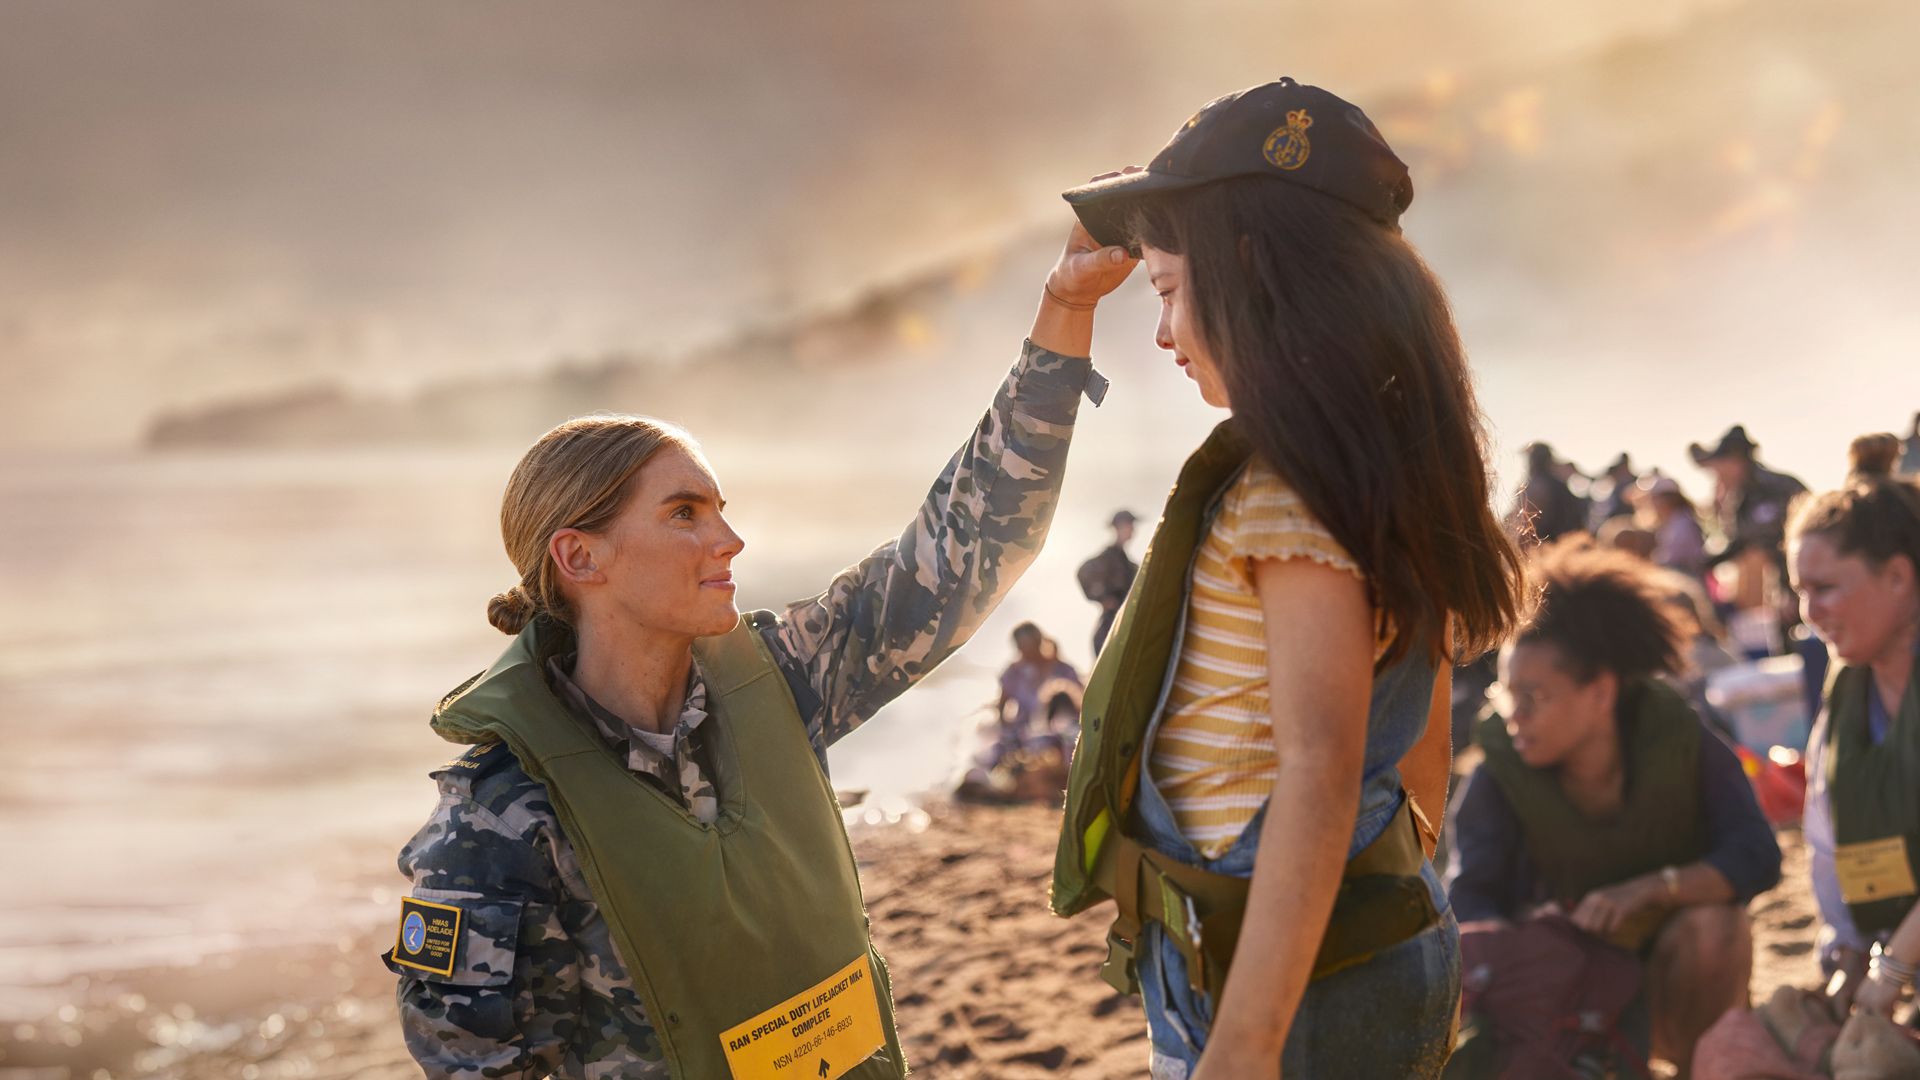 A member of the Navy outside on a beach with a young girl.